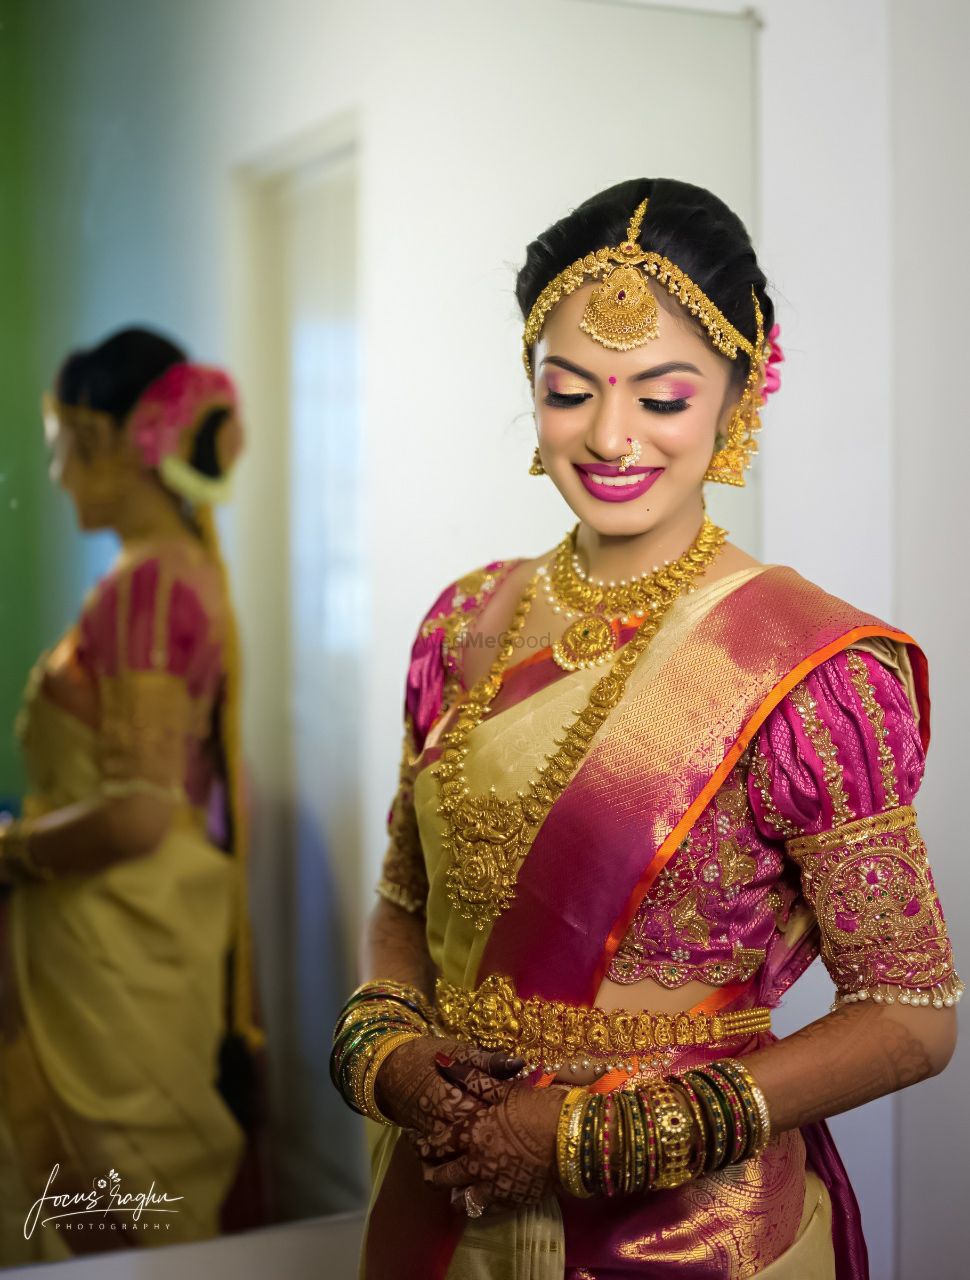 Photo From Soumya - By Makeup by Sweta